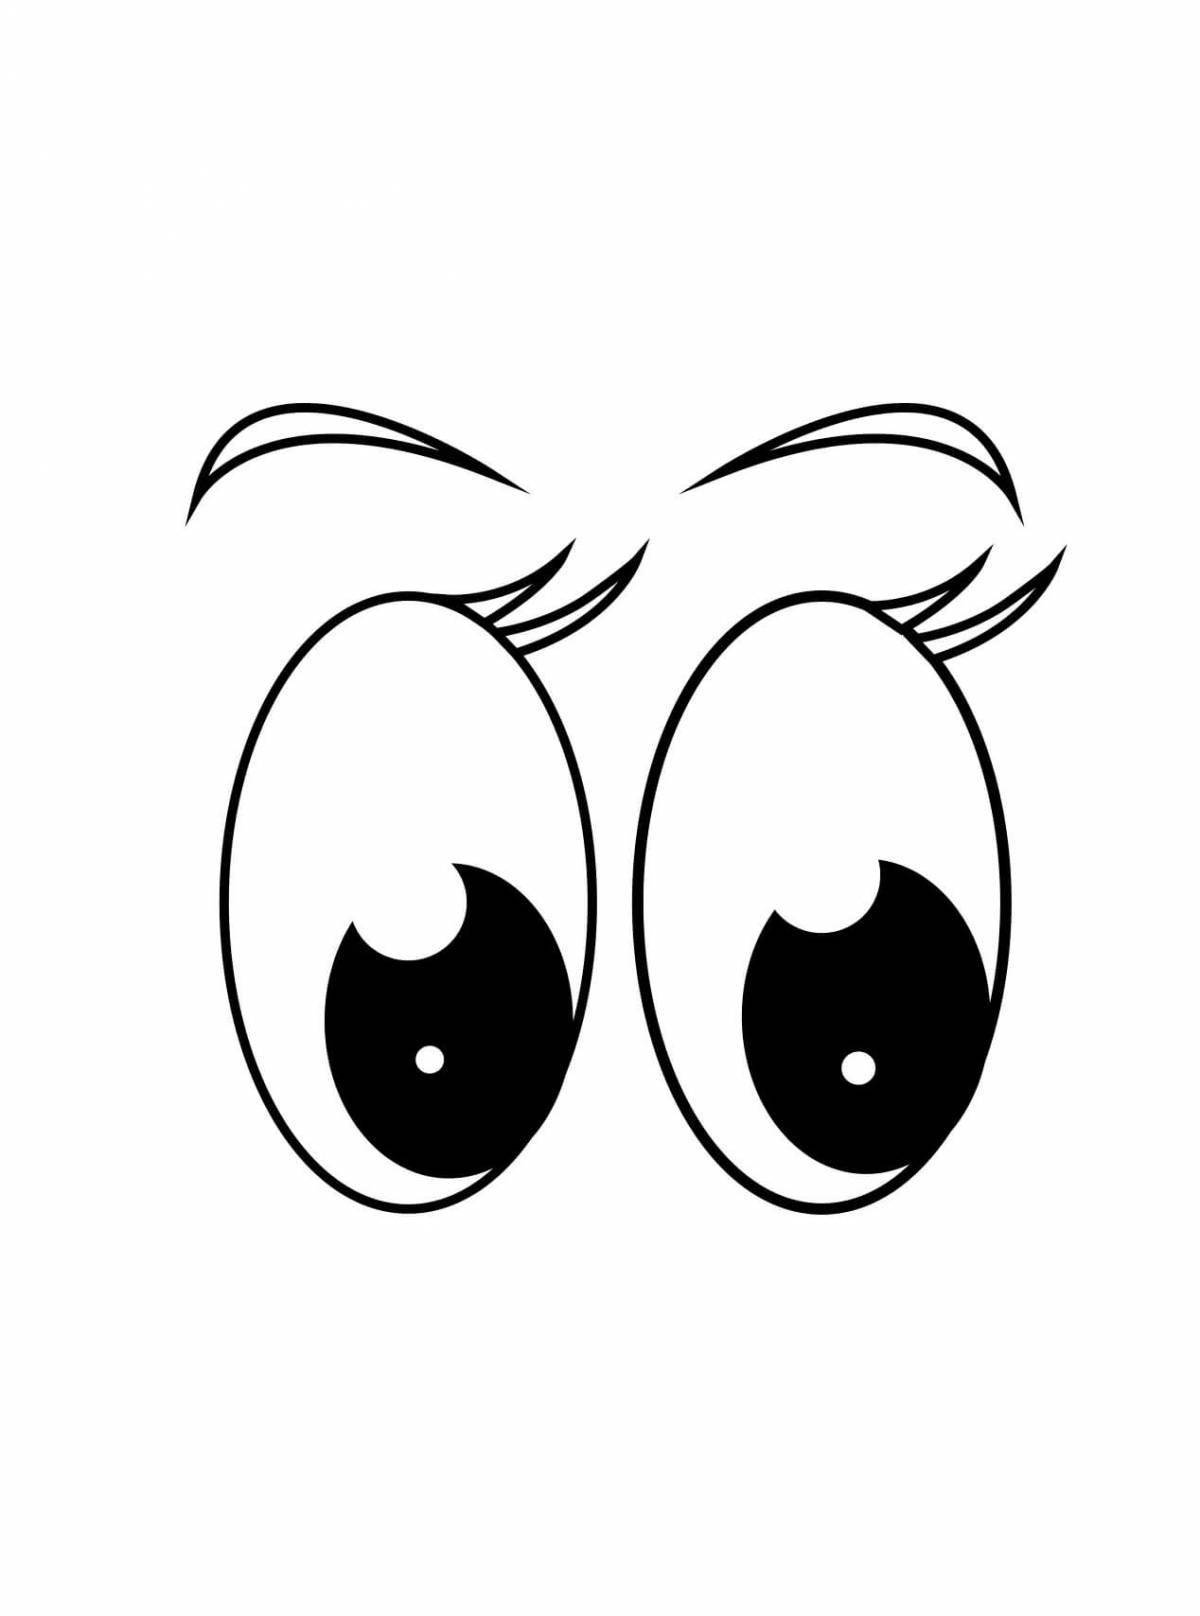 Eyes Coloring Page